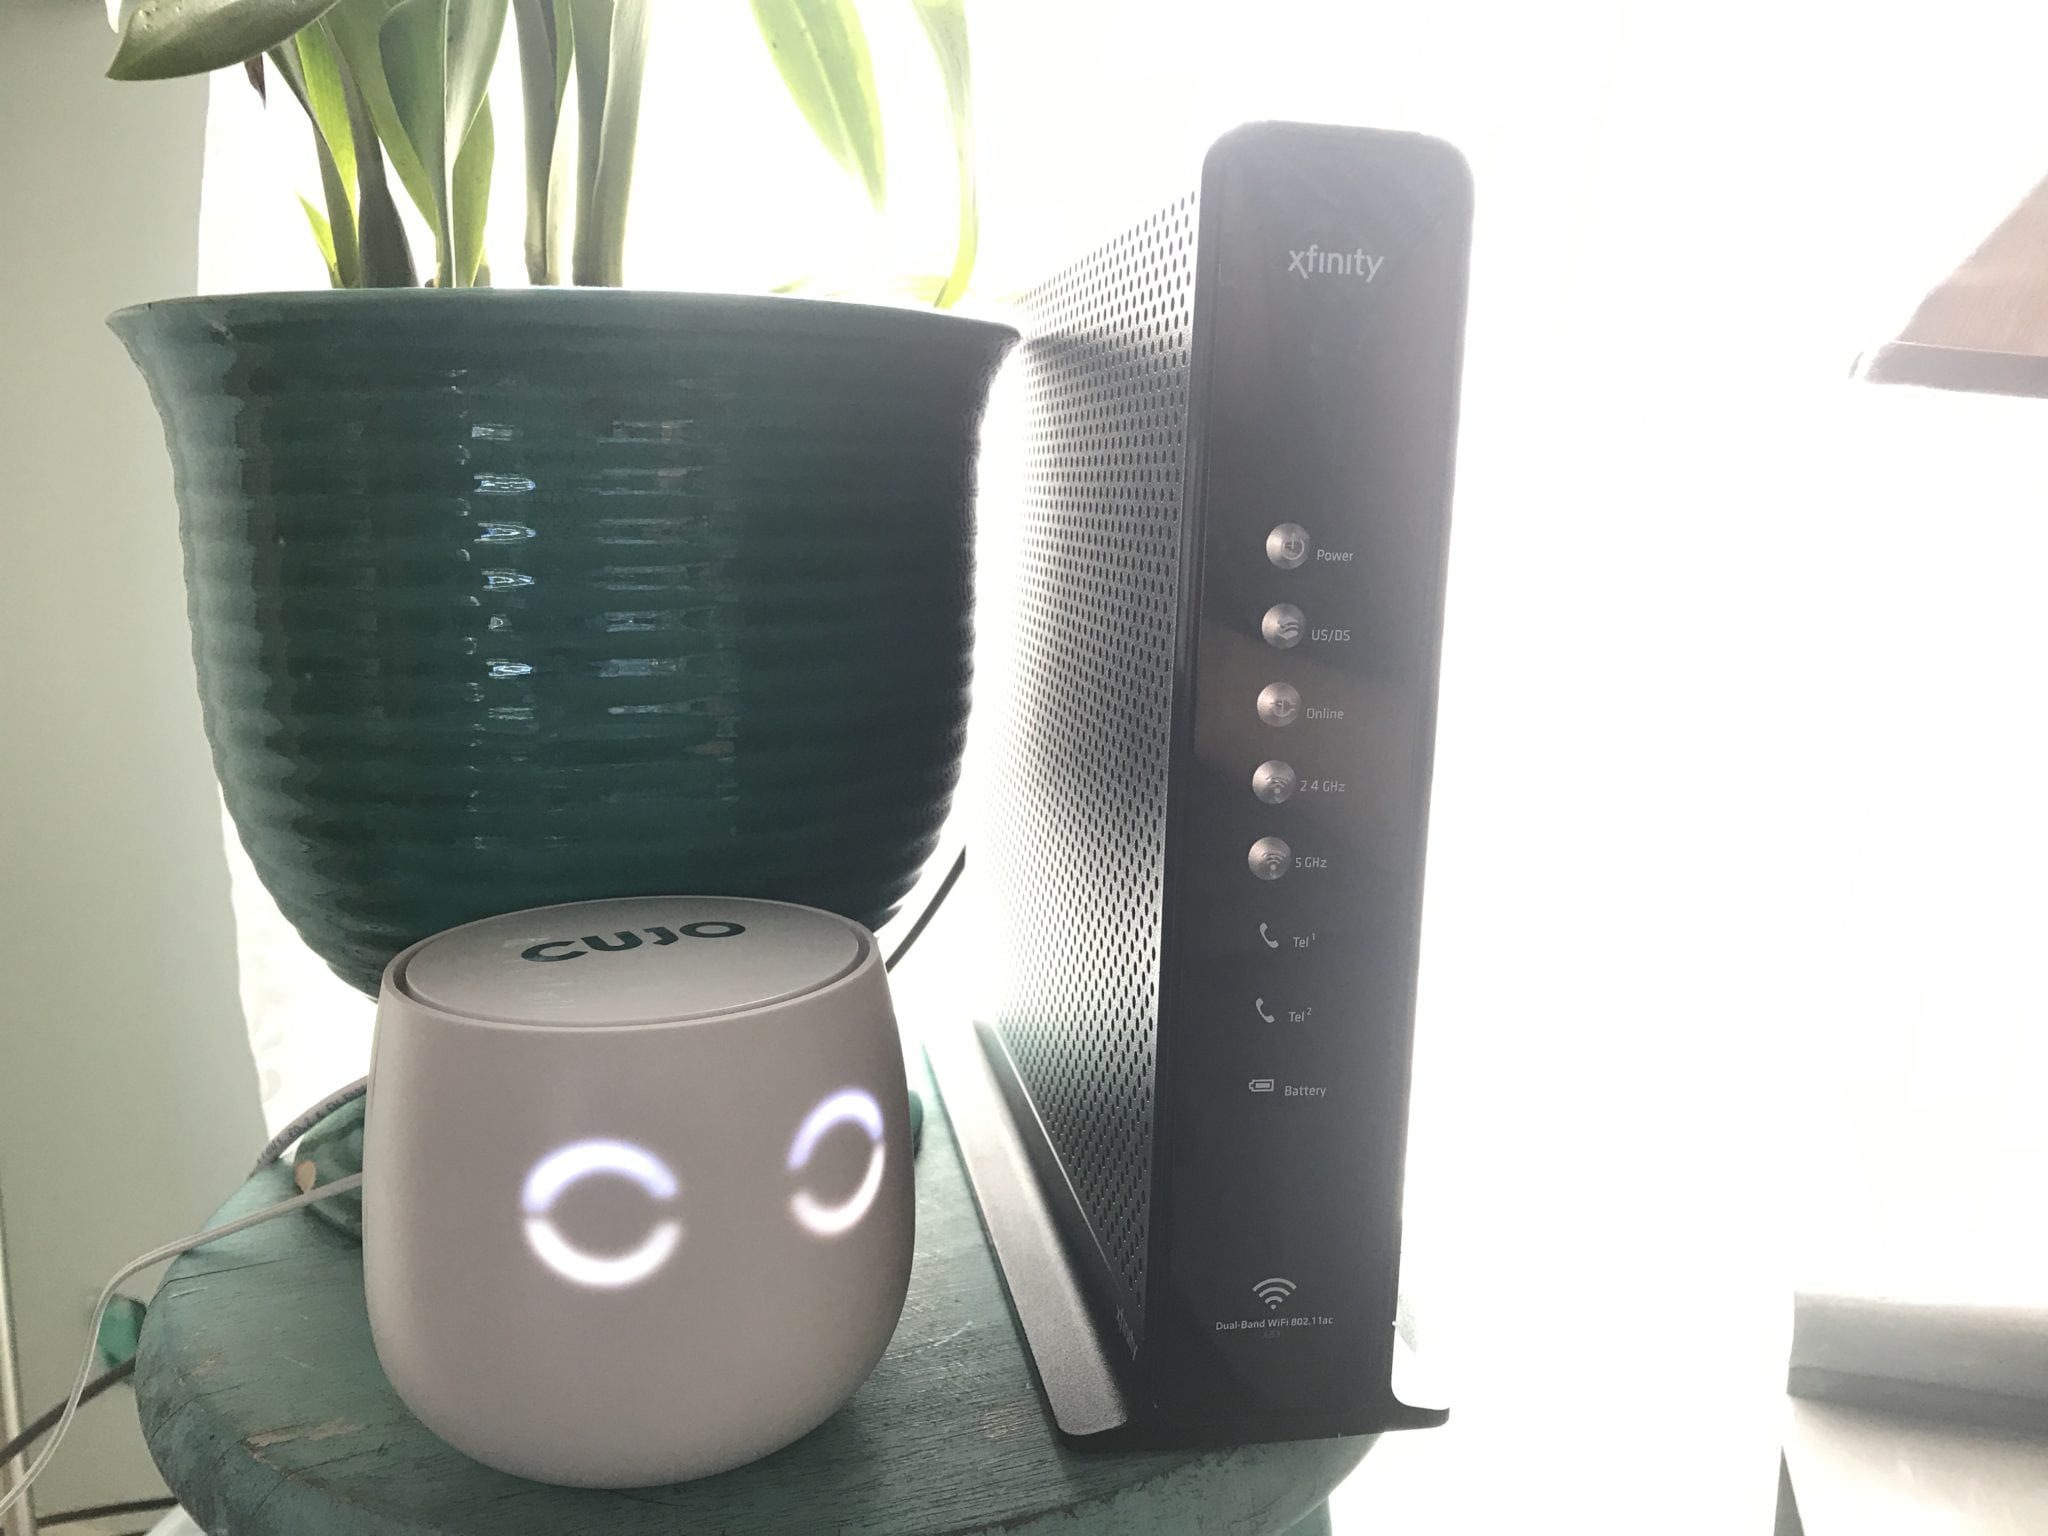 CUJO- Family Internet Security Device, A Review